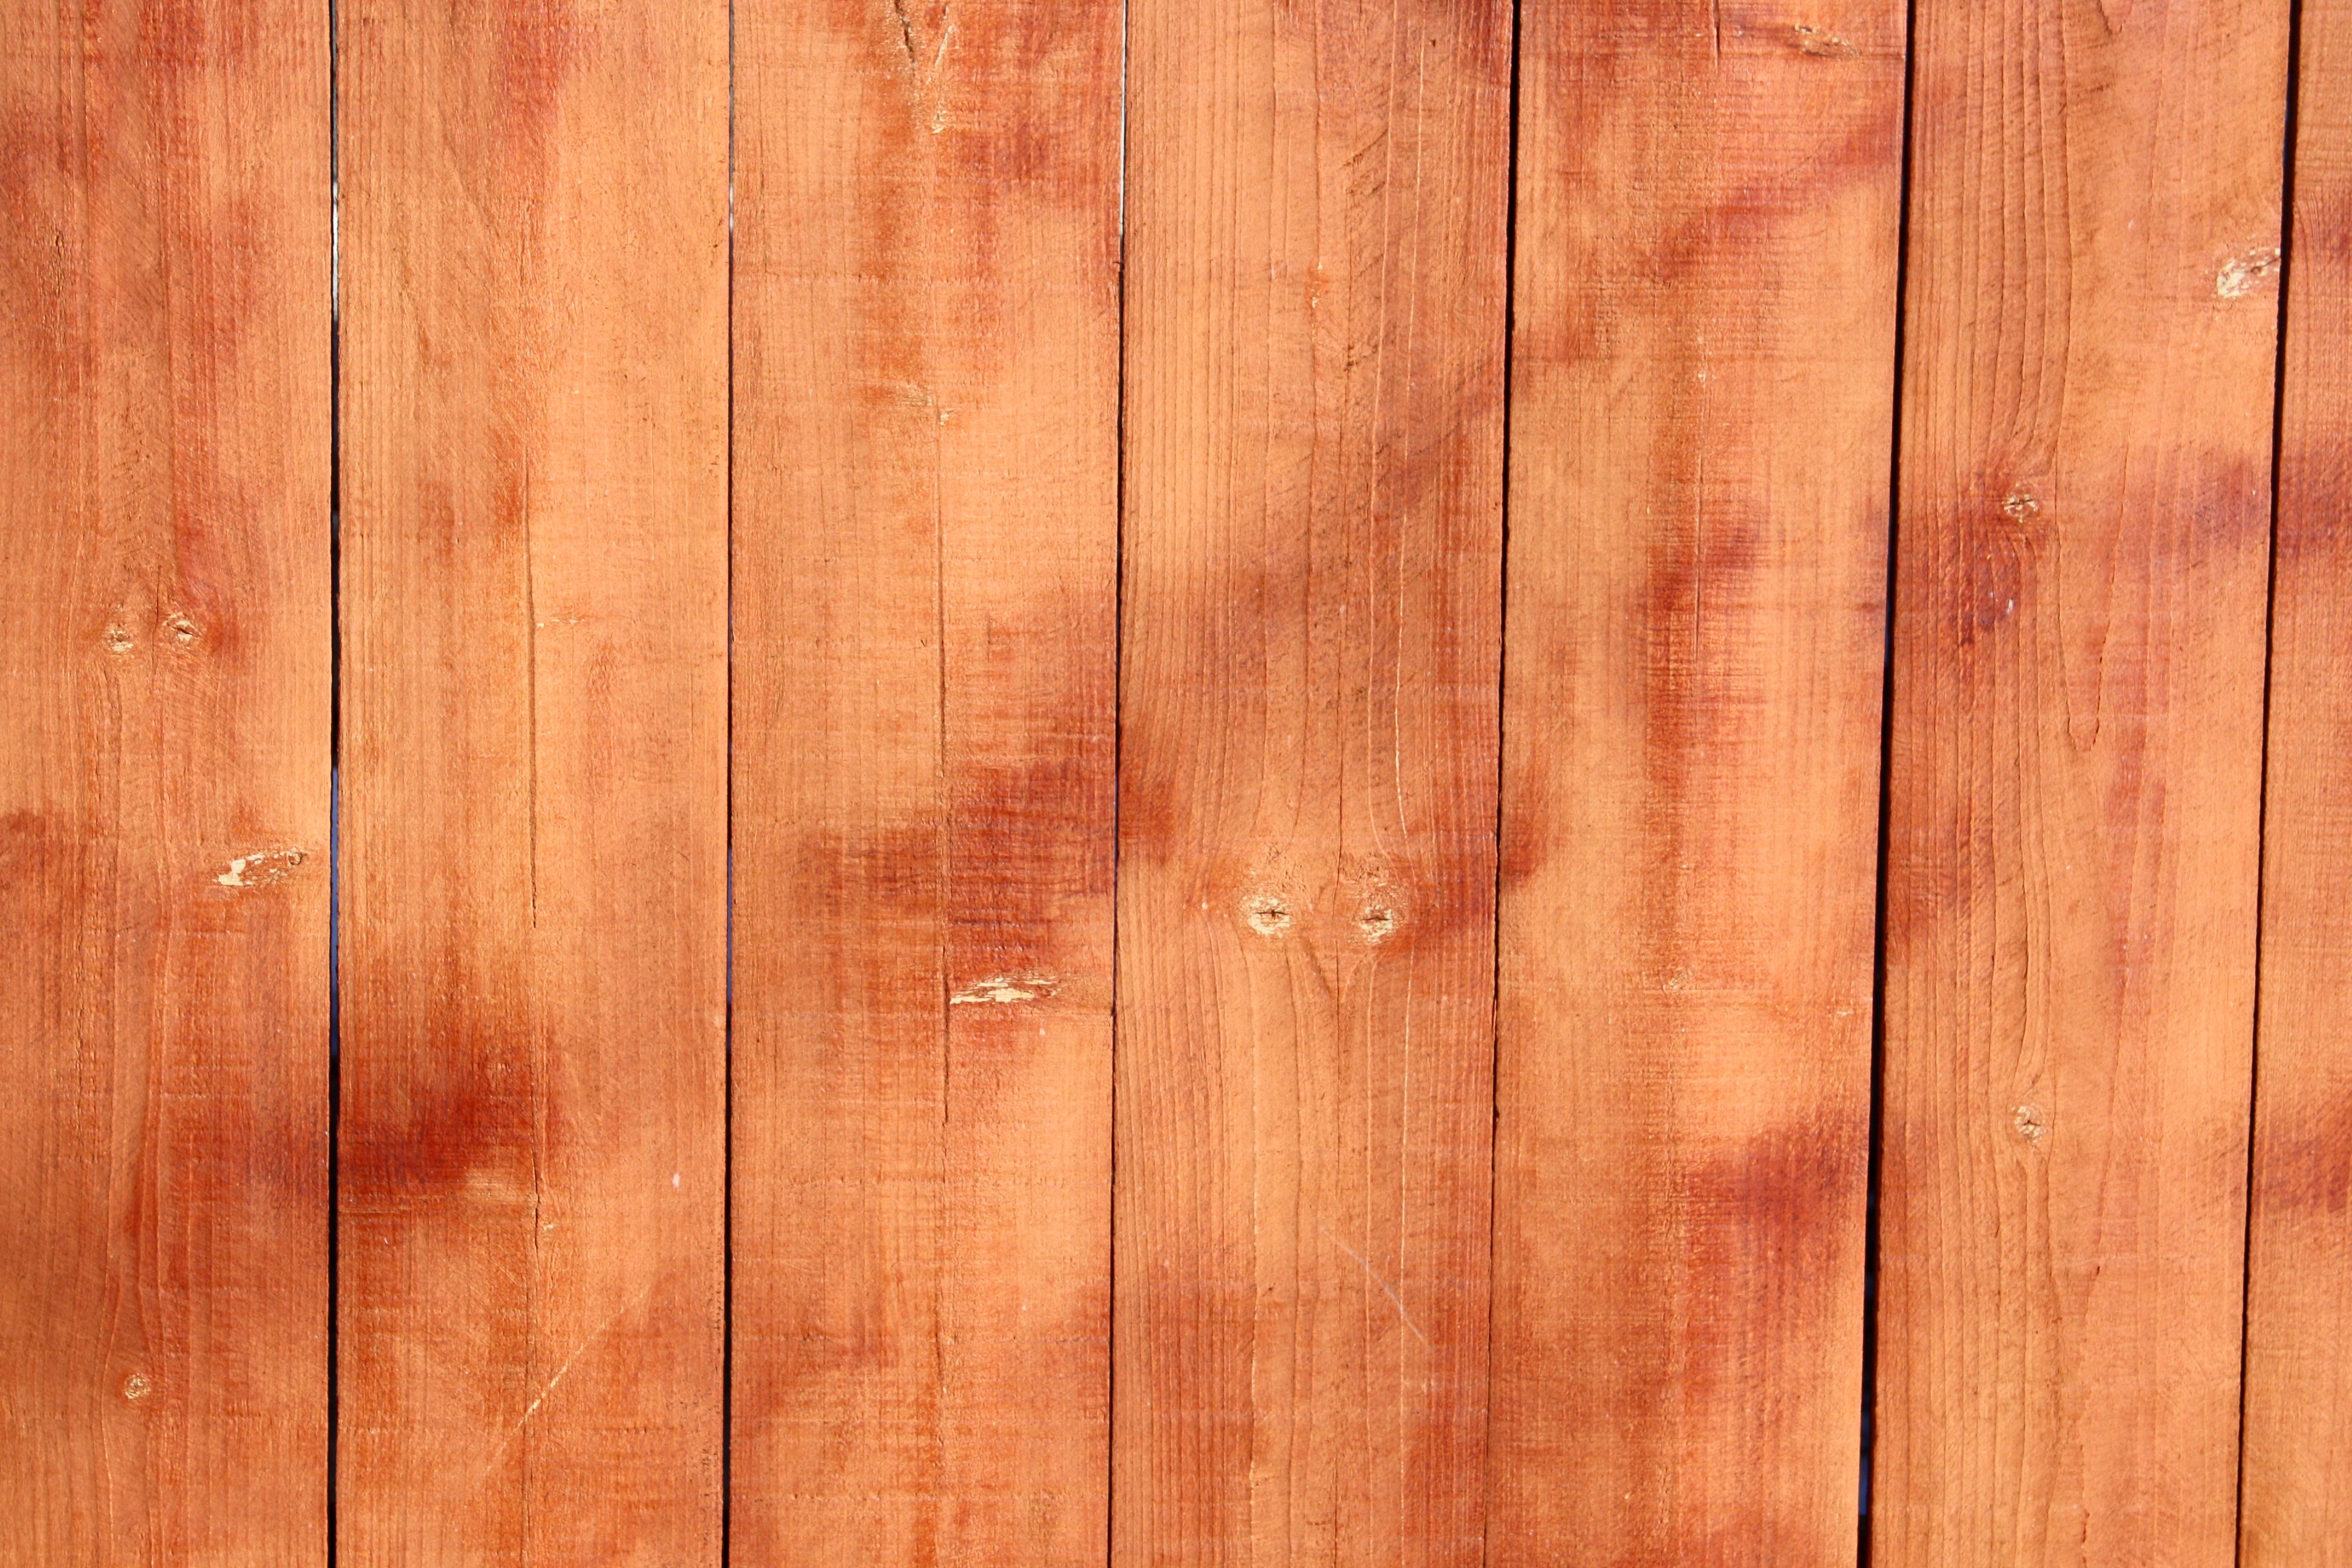 Stained Wooden Fence Boards Closeup Texture Picture | Free ...